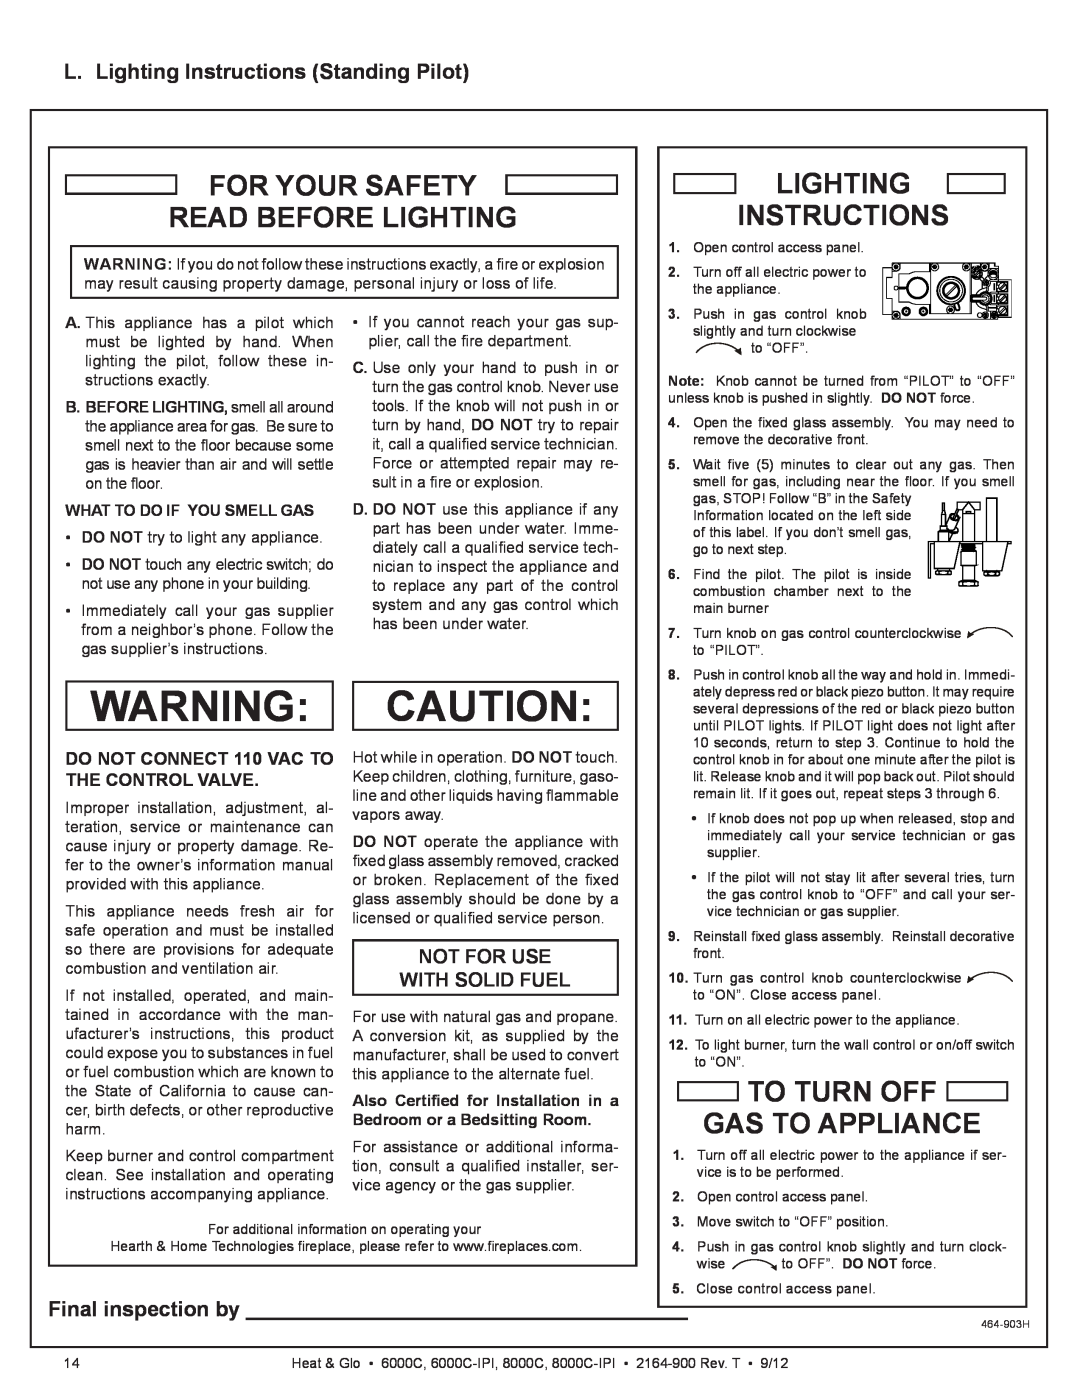 Heat & Glo LifeStyle 6000C L. Lighting Instructions Standing Pilot, Warning: Caution, To Turn Off Gas To Appliance 